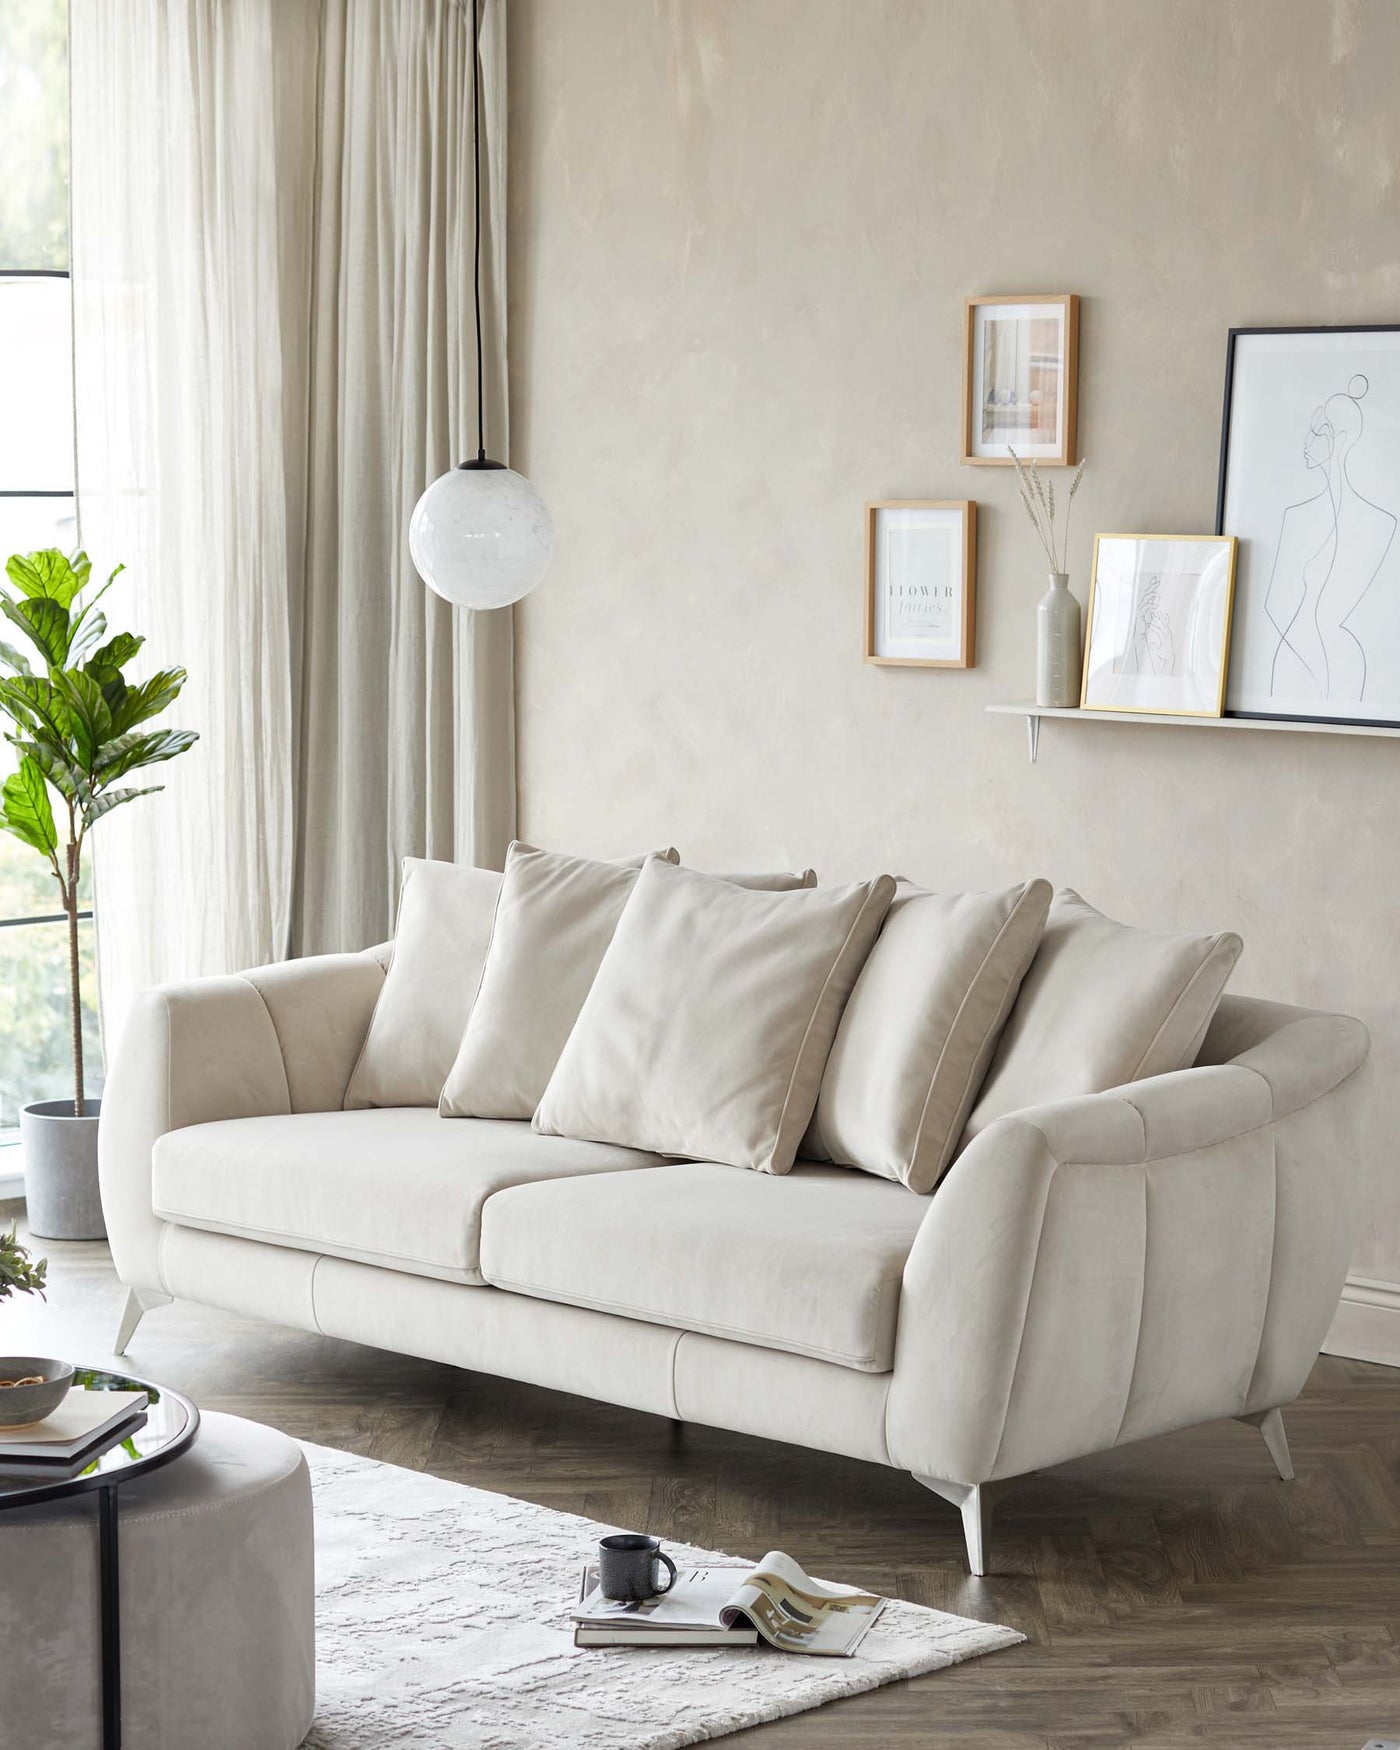 Elegant contemporary three-seater sofa with plush beige upholstery, featuring a curved arm design, accompanied by matching beige scatter cushions. A chic round grey ottoman sits as a centrepiece on a textured white area rug, with reading materials casually placed on it. The setting is complemented by minimalist decor and natural lighting, creating a serene living space ambiance.